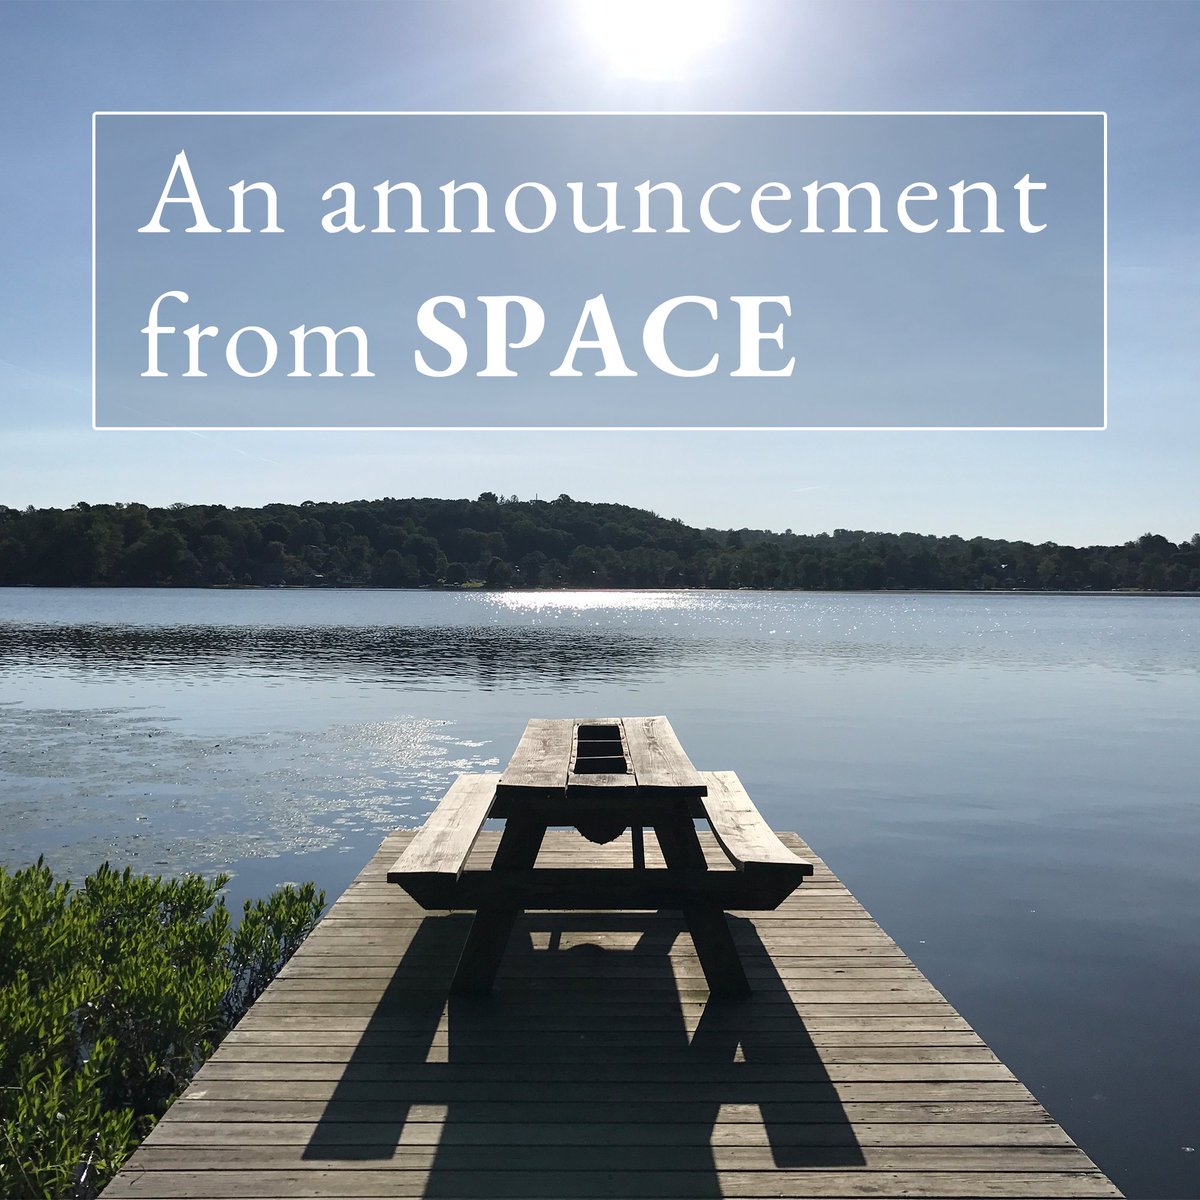 SPACE is excited to share some new updates and we will be making a more robust announcement in November. In the meantime, we know many of you are waiting to hear about the application process for 2023 residencies. You can read an update here bit.ly/SPACEAnnouncem….